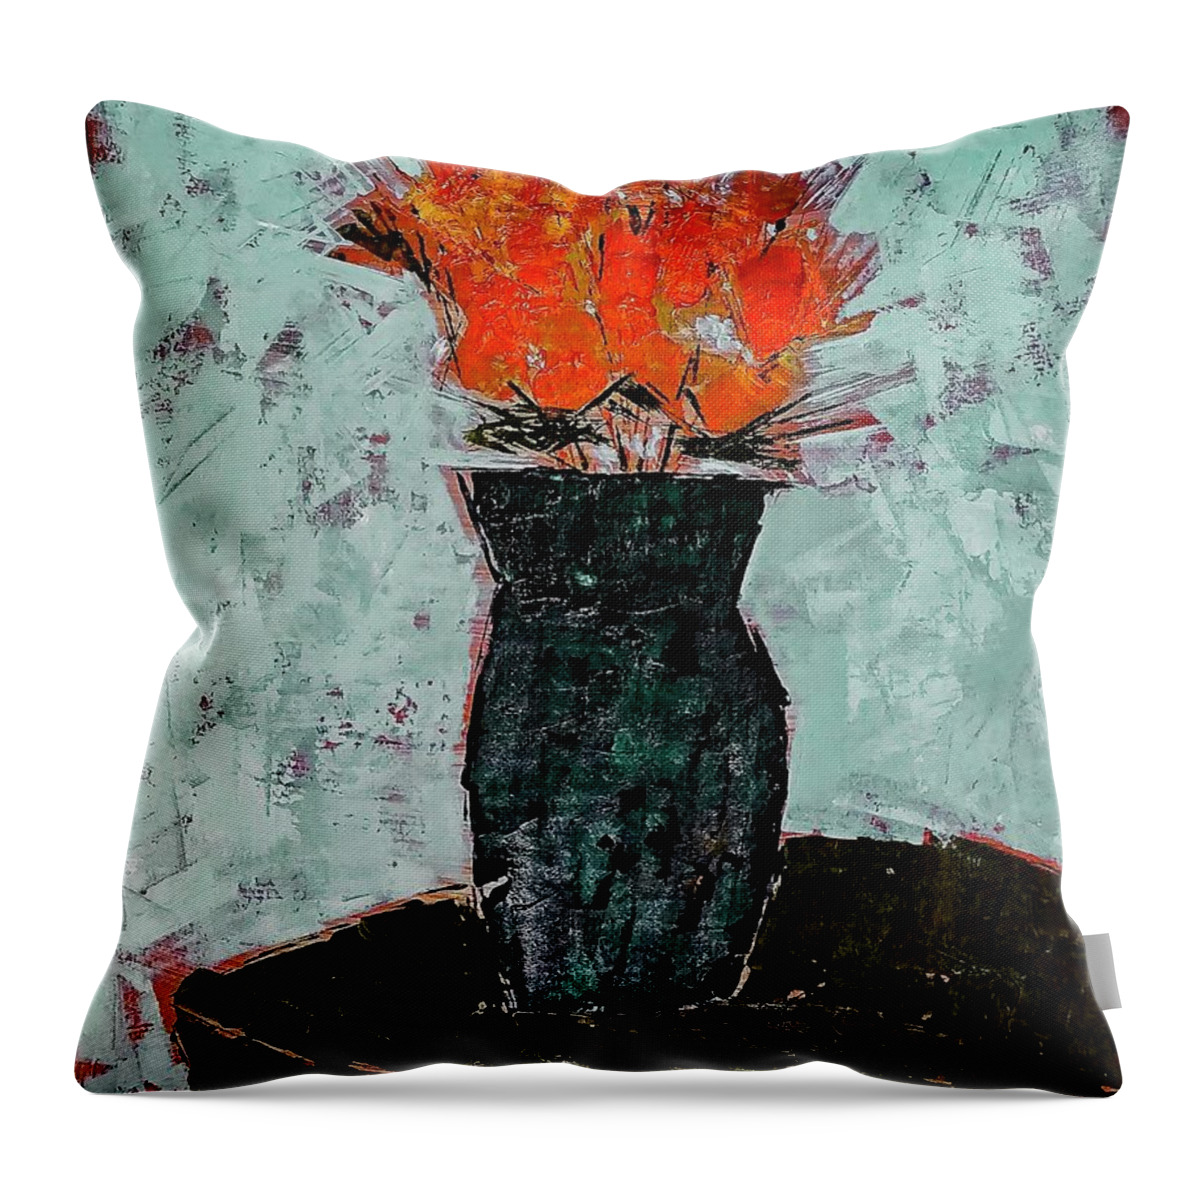 Blue Vase Throw Pillow featuring the painting Blue Vase by Marty Klar